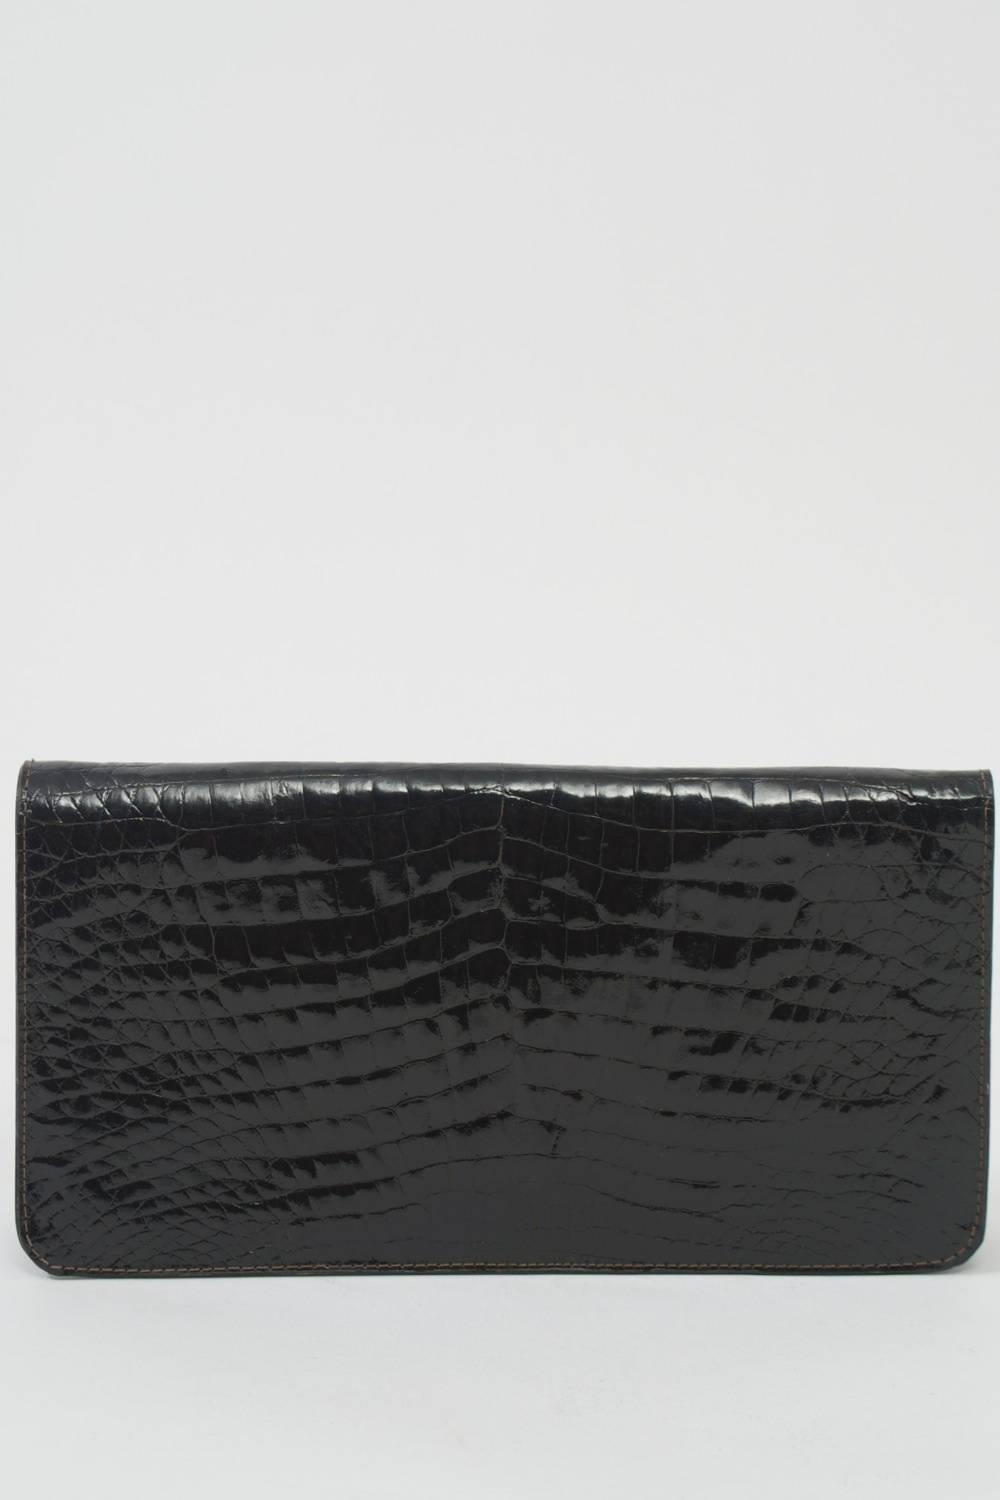 Simple, classic, and timeless, this black crocodile clutch from Charles Jourdan has a foldover flap that closes with a snap. Interior is lined in black leather and has a side compartment. Skins in excellent condition.